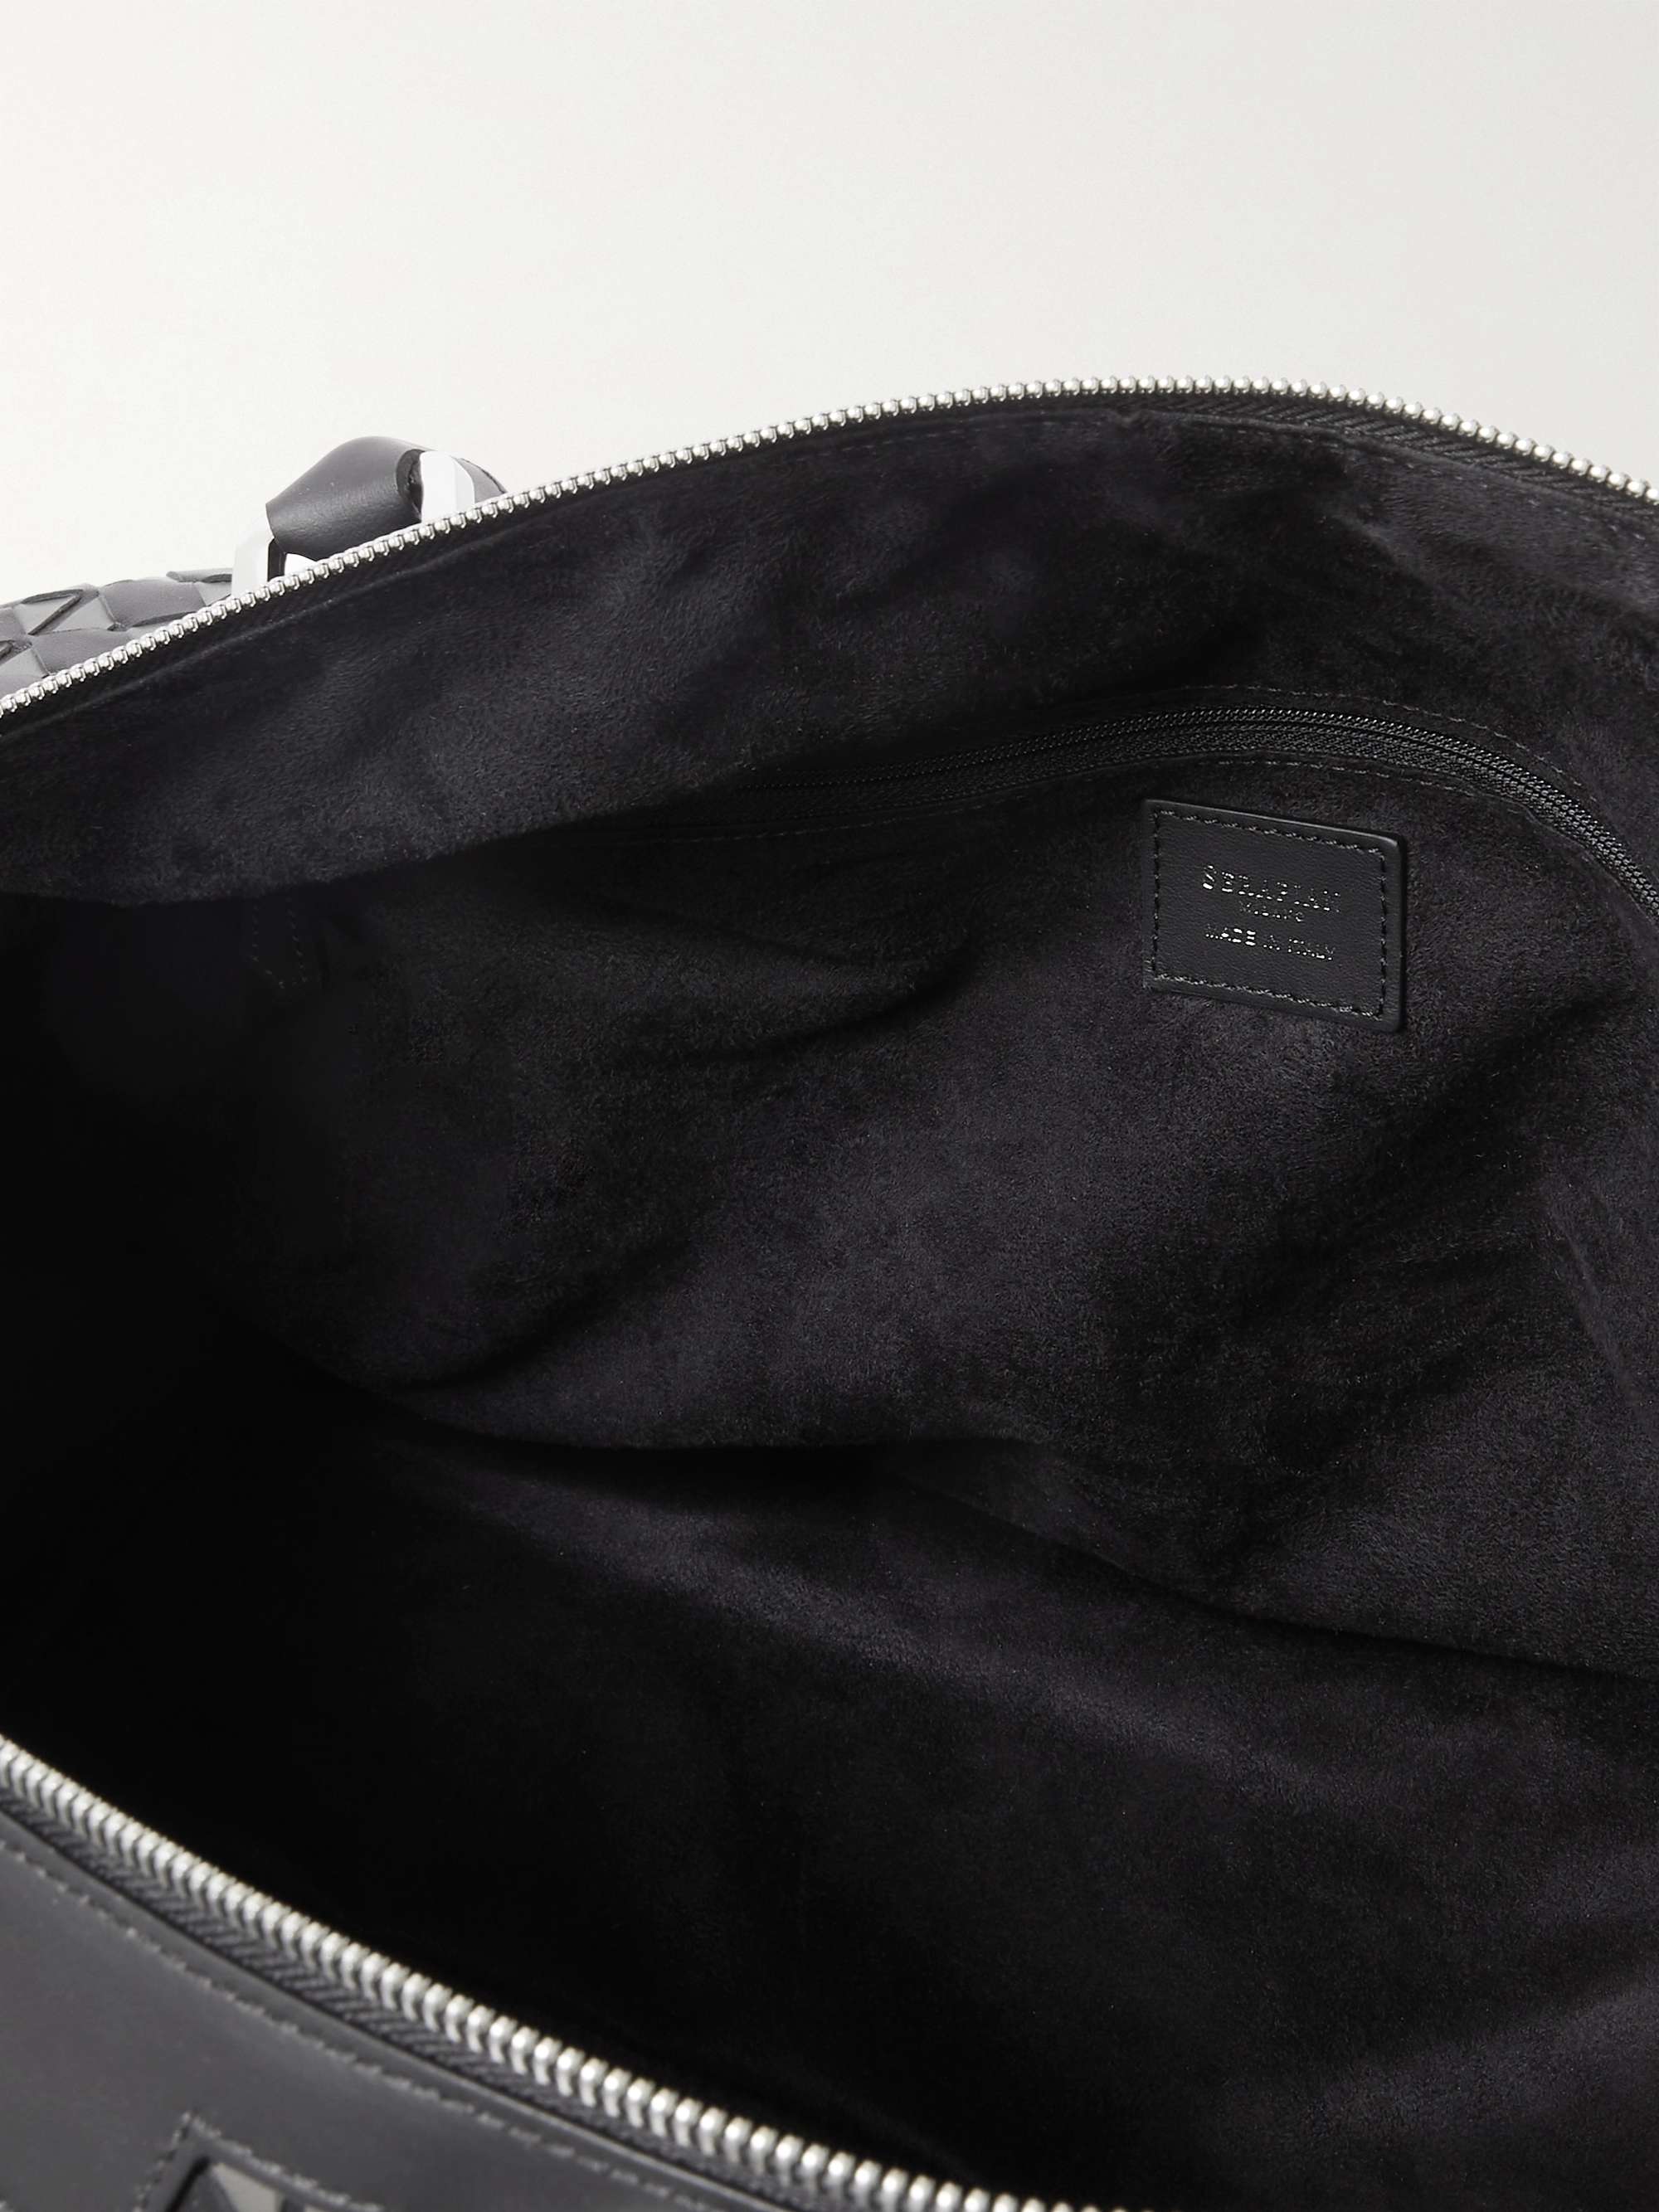 SERAPIAN Woven Leather Holdall